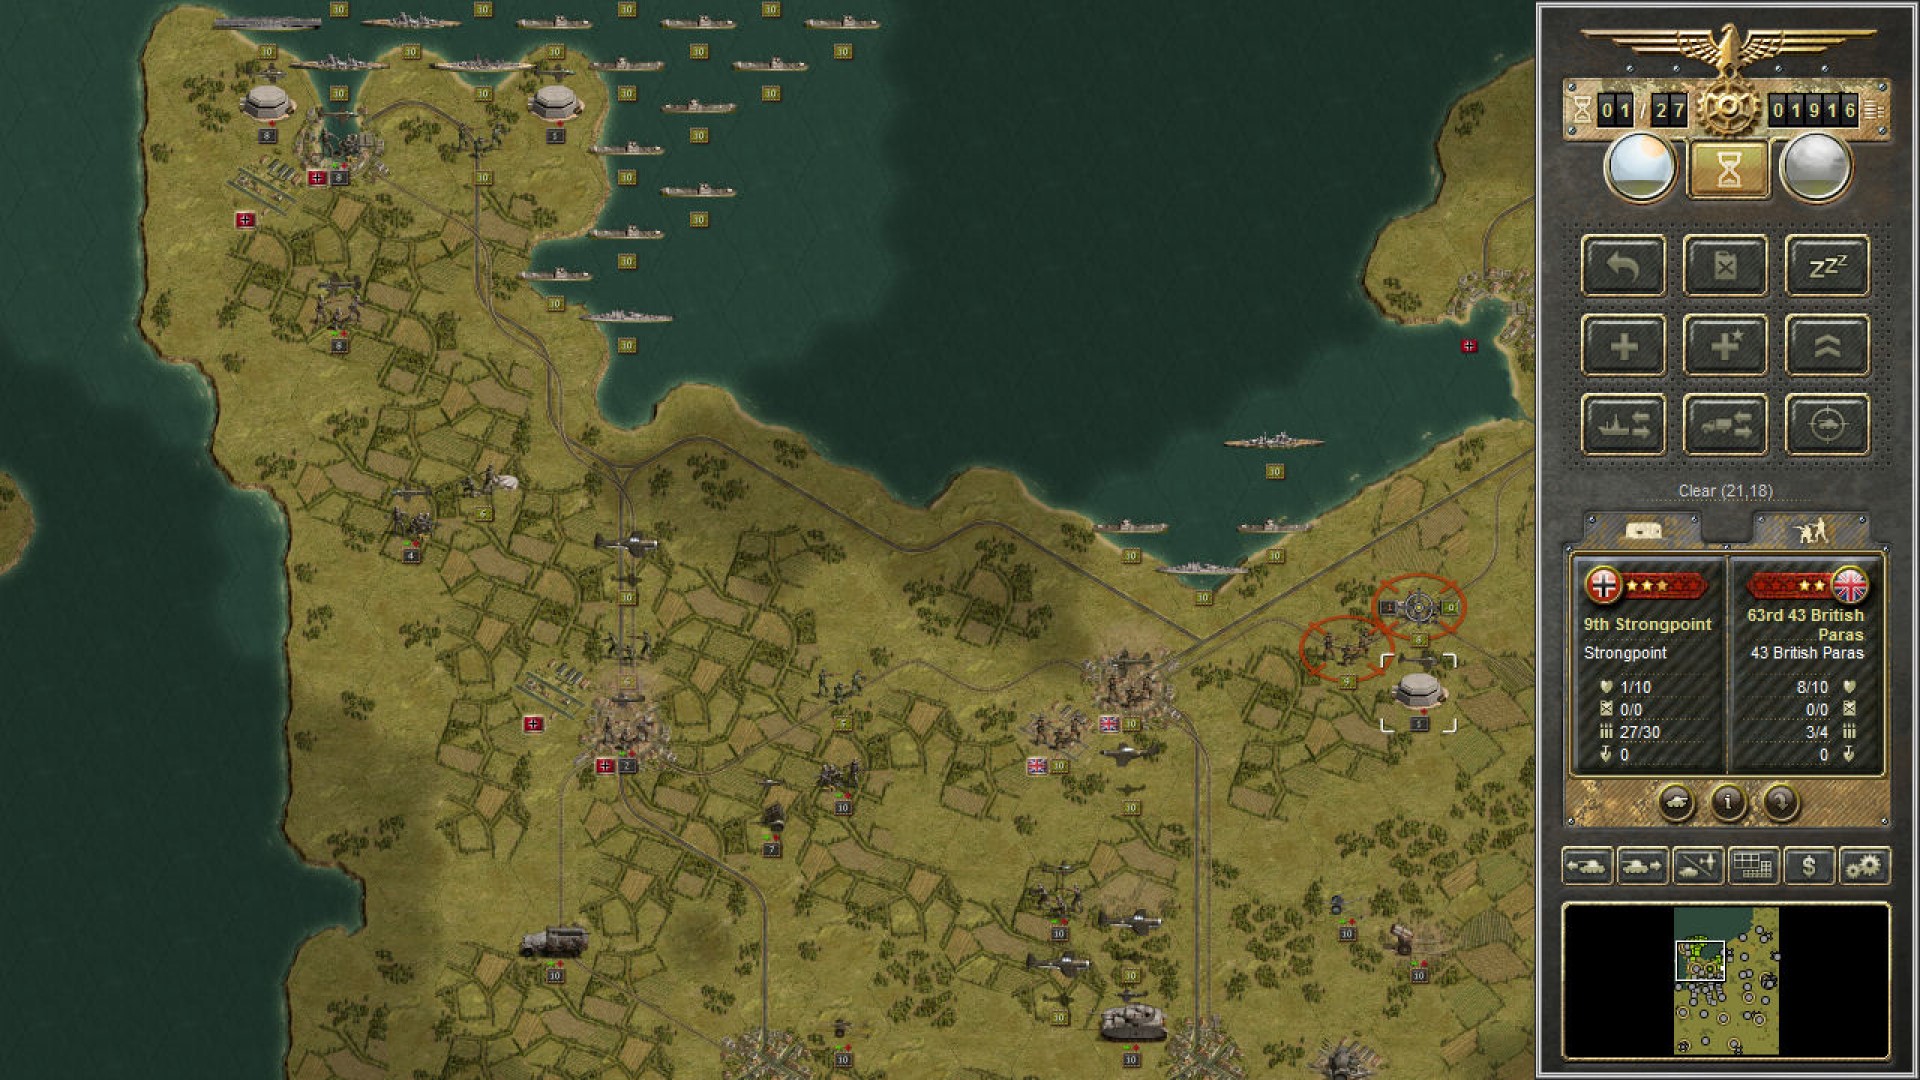 Best mobile war games: Panzer Corps. Image shows a map with various military units spread out across itt.